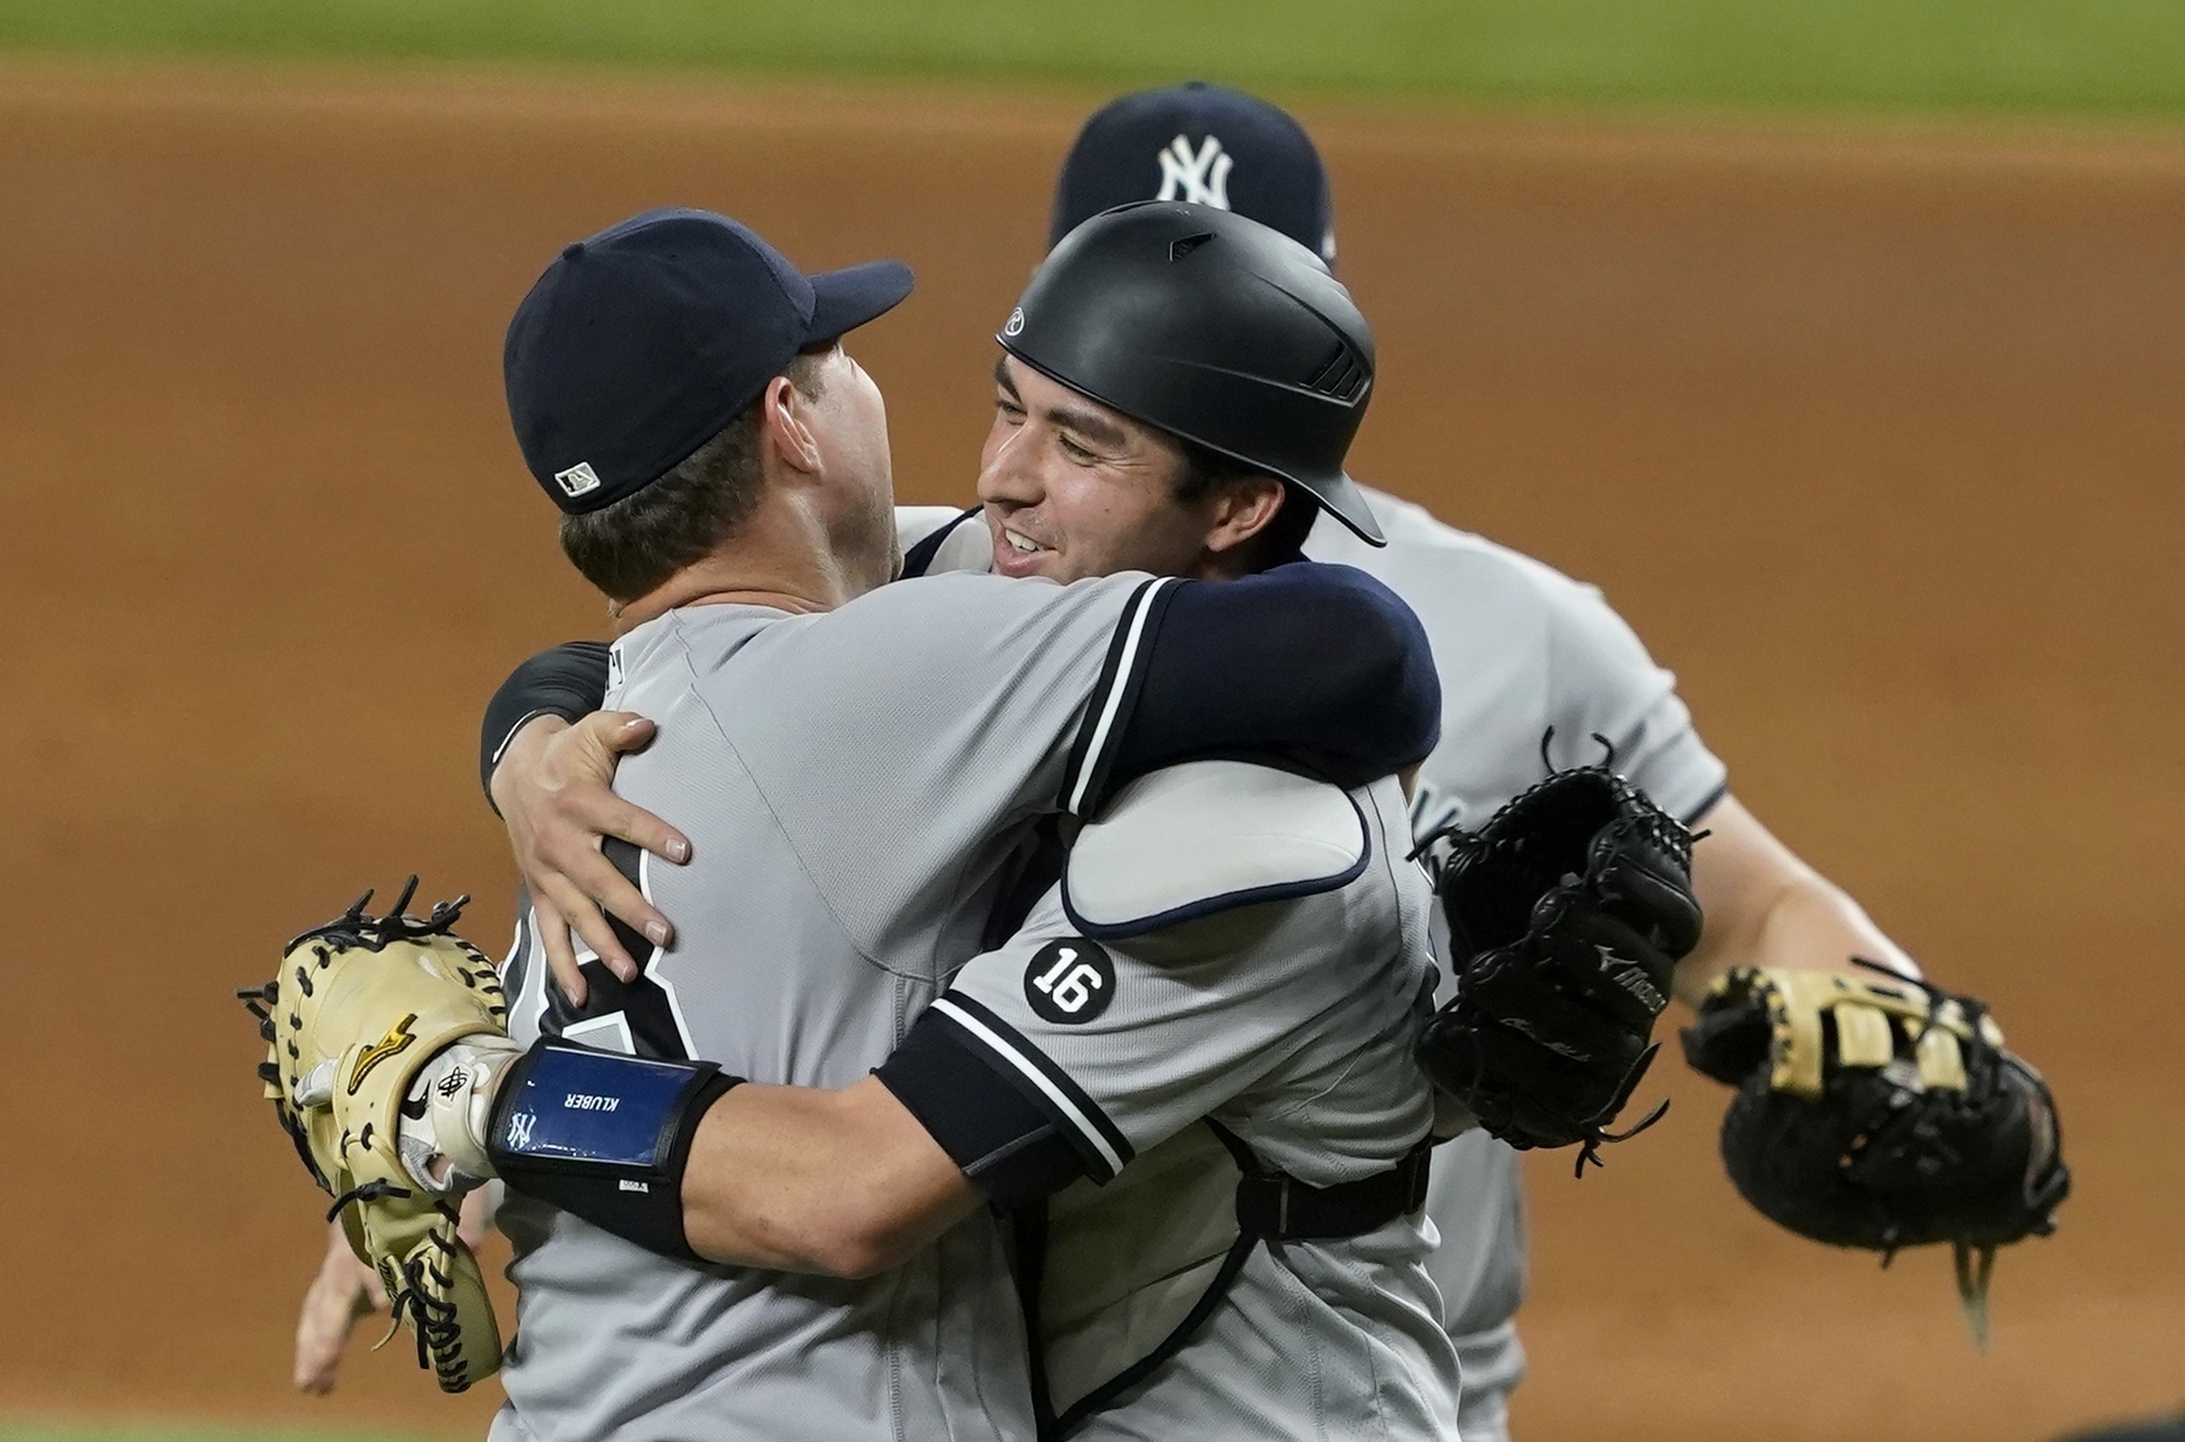 New York Yankees starting pitcher Corey Kluber, catcher Kyle Higashioka, right, and first baseman Luke Voit, rear, celebrate after Kluber threw a no-hitter against the Texas Rangers in a baseball game in Arlington, Texas, Wednesday, May 19, 2021.